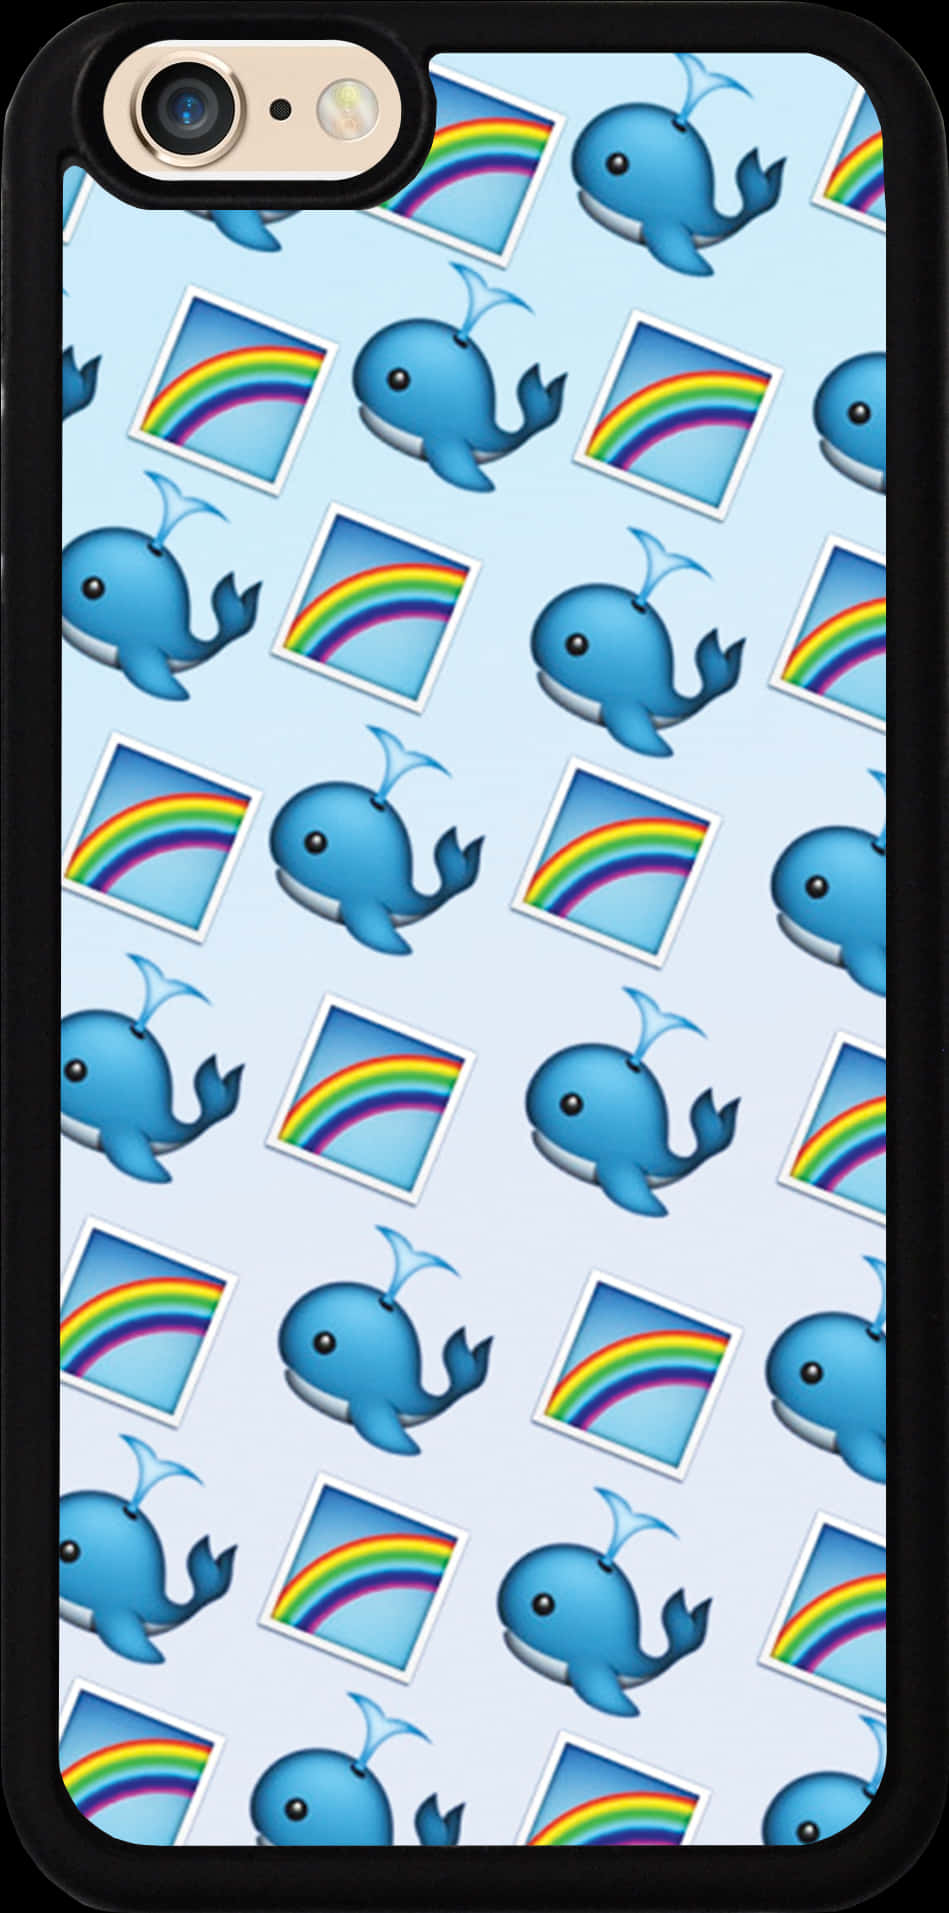 A Cell Phone Screen With A Blue Whale And Rainbow